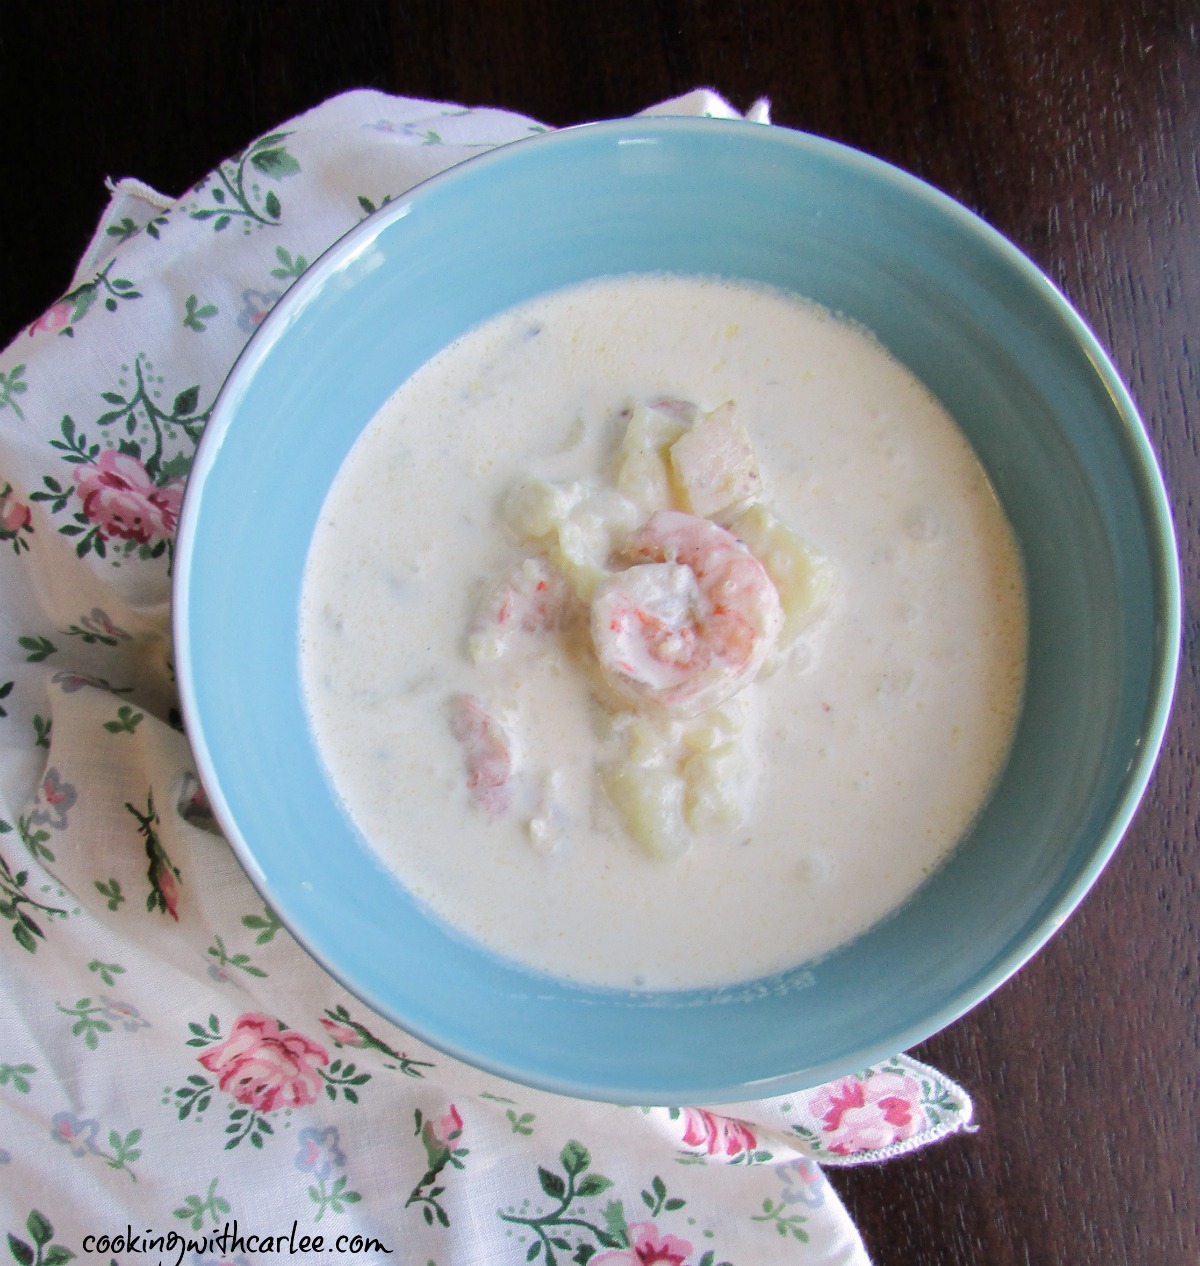 Bowl of creamy seafood chowder with shrimp and fish, ready to eat. 